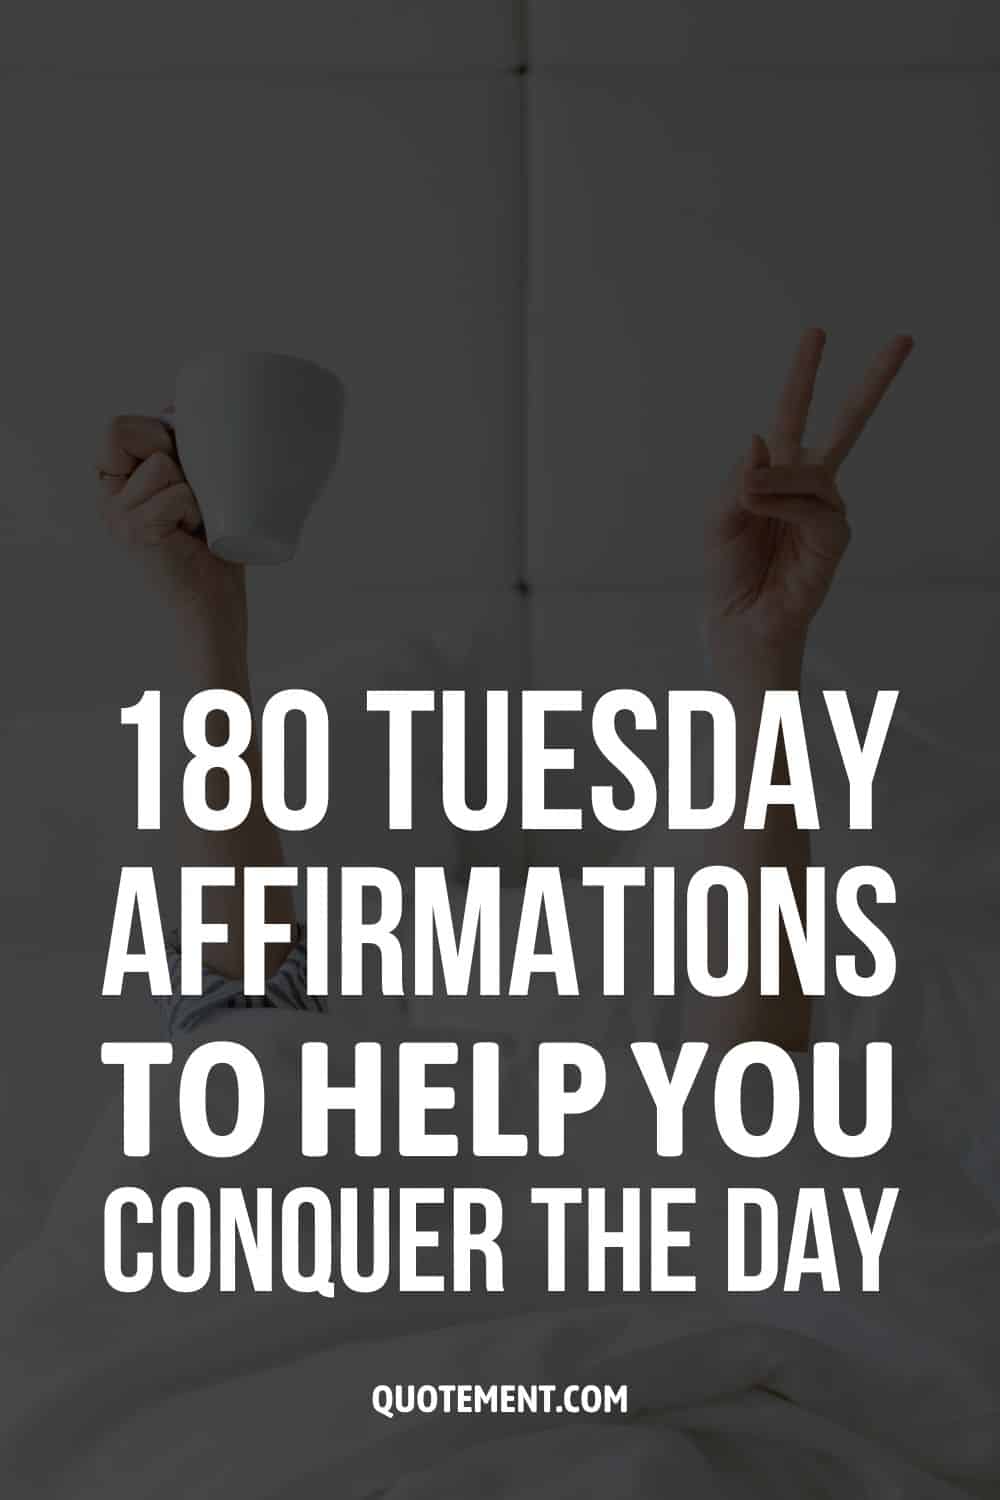 180 Tuesday Affirmations To Help You Conquer The Day
